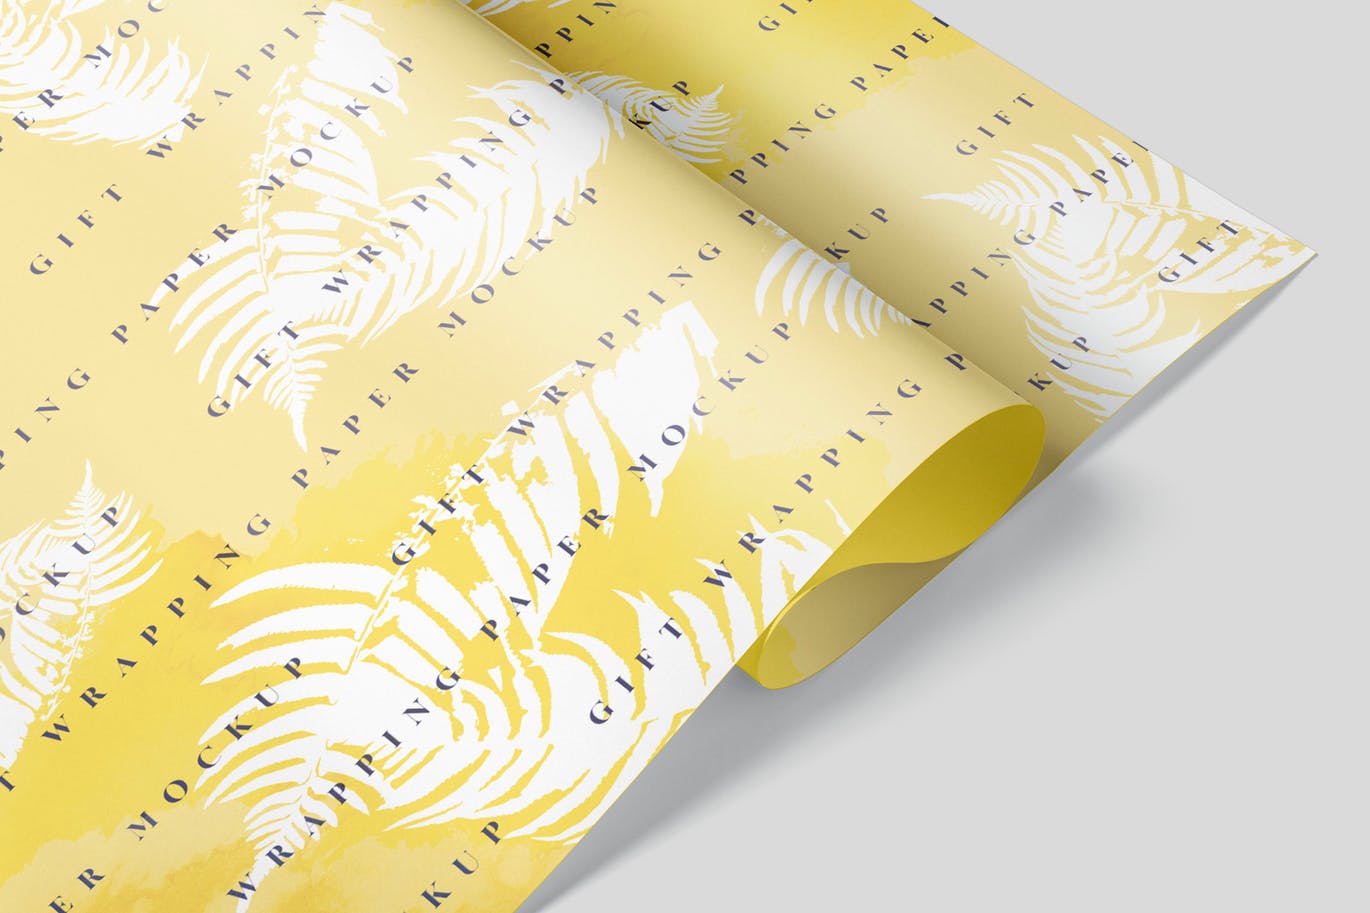 Download 25+ Magnificent Gift Wrapping Paper Mockup Templates ...